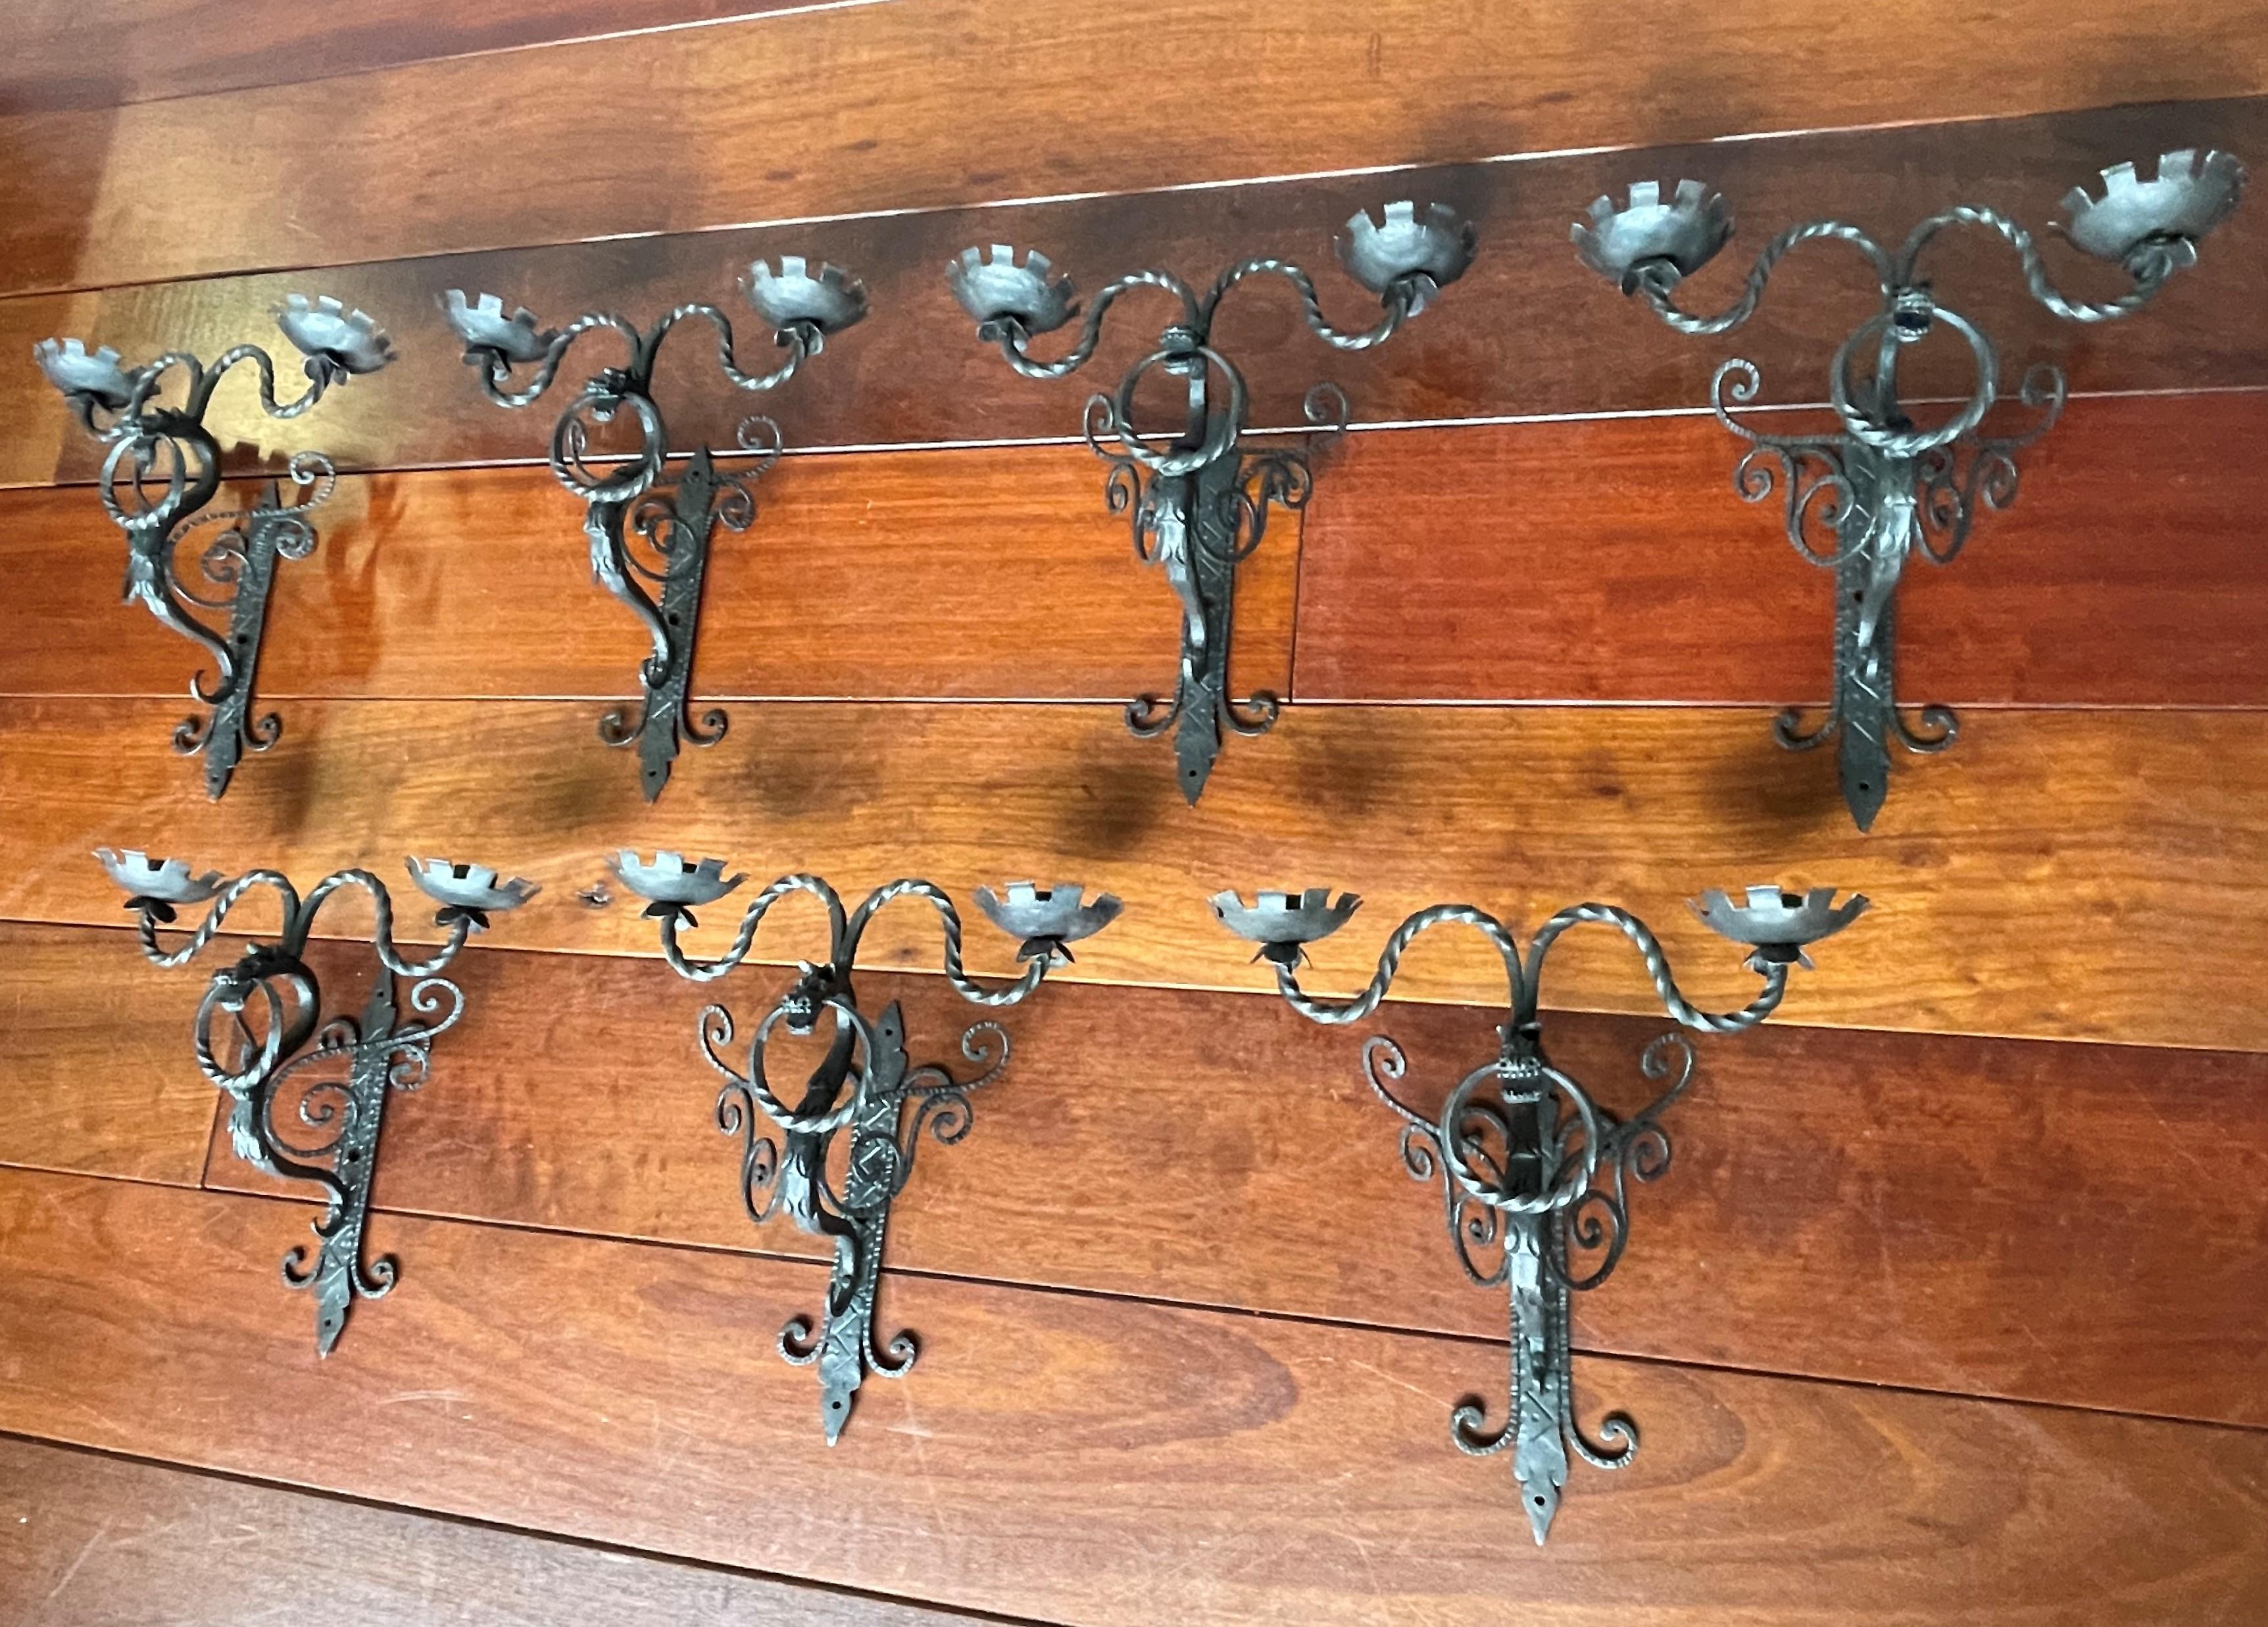 Rare Set of 7 Antique Wrought Iron Gothic Revival Dragon Sculpture Wall Sconces For Sale 14